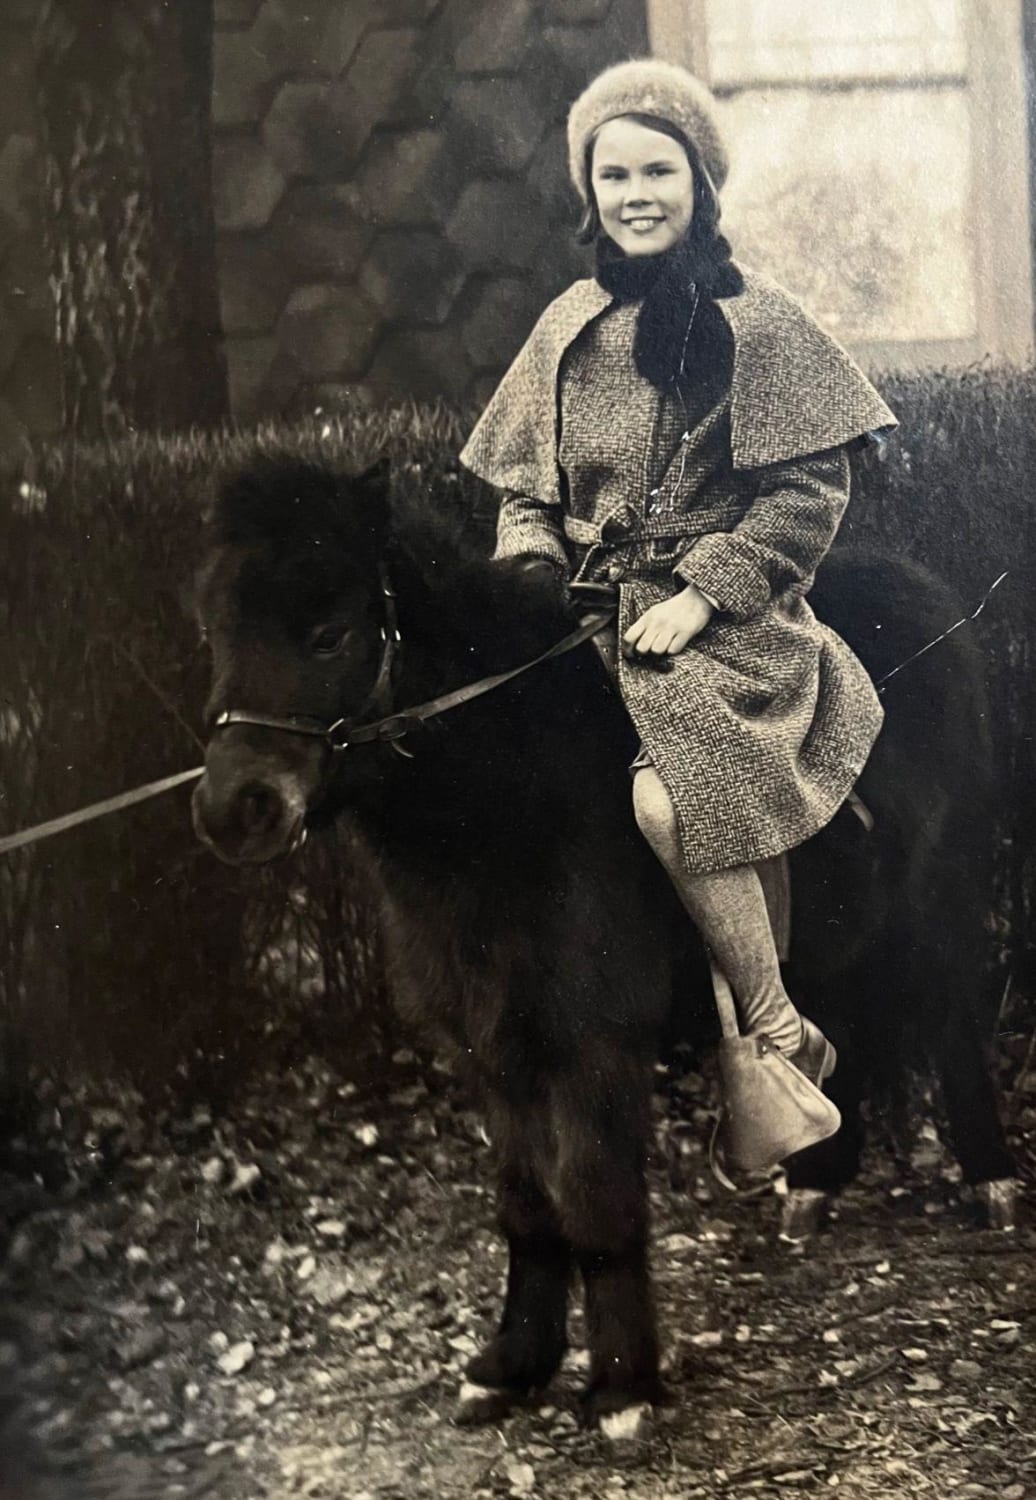 11 year old girl on a pony, January 1930.